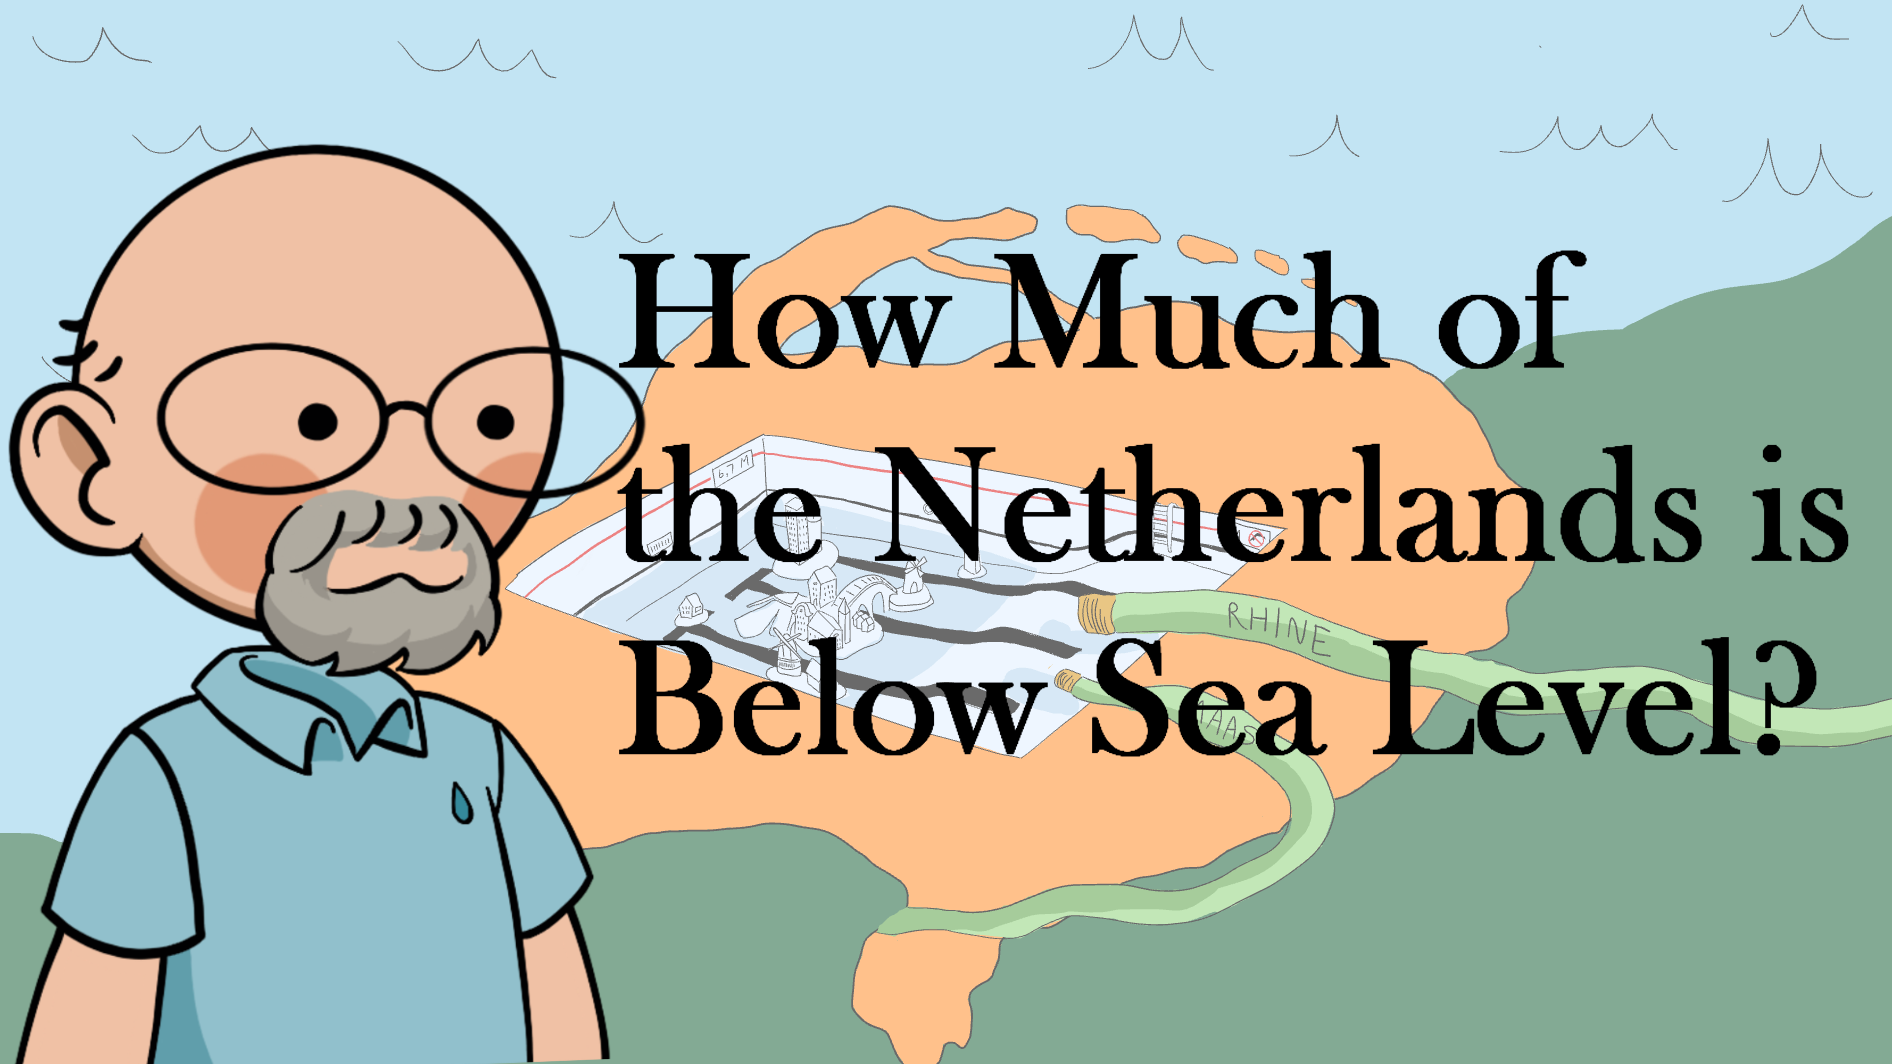 An animated portrait of Dr. Richter looks over a cartoon Netherlands depicted as a swimming pool